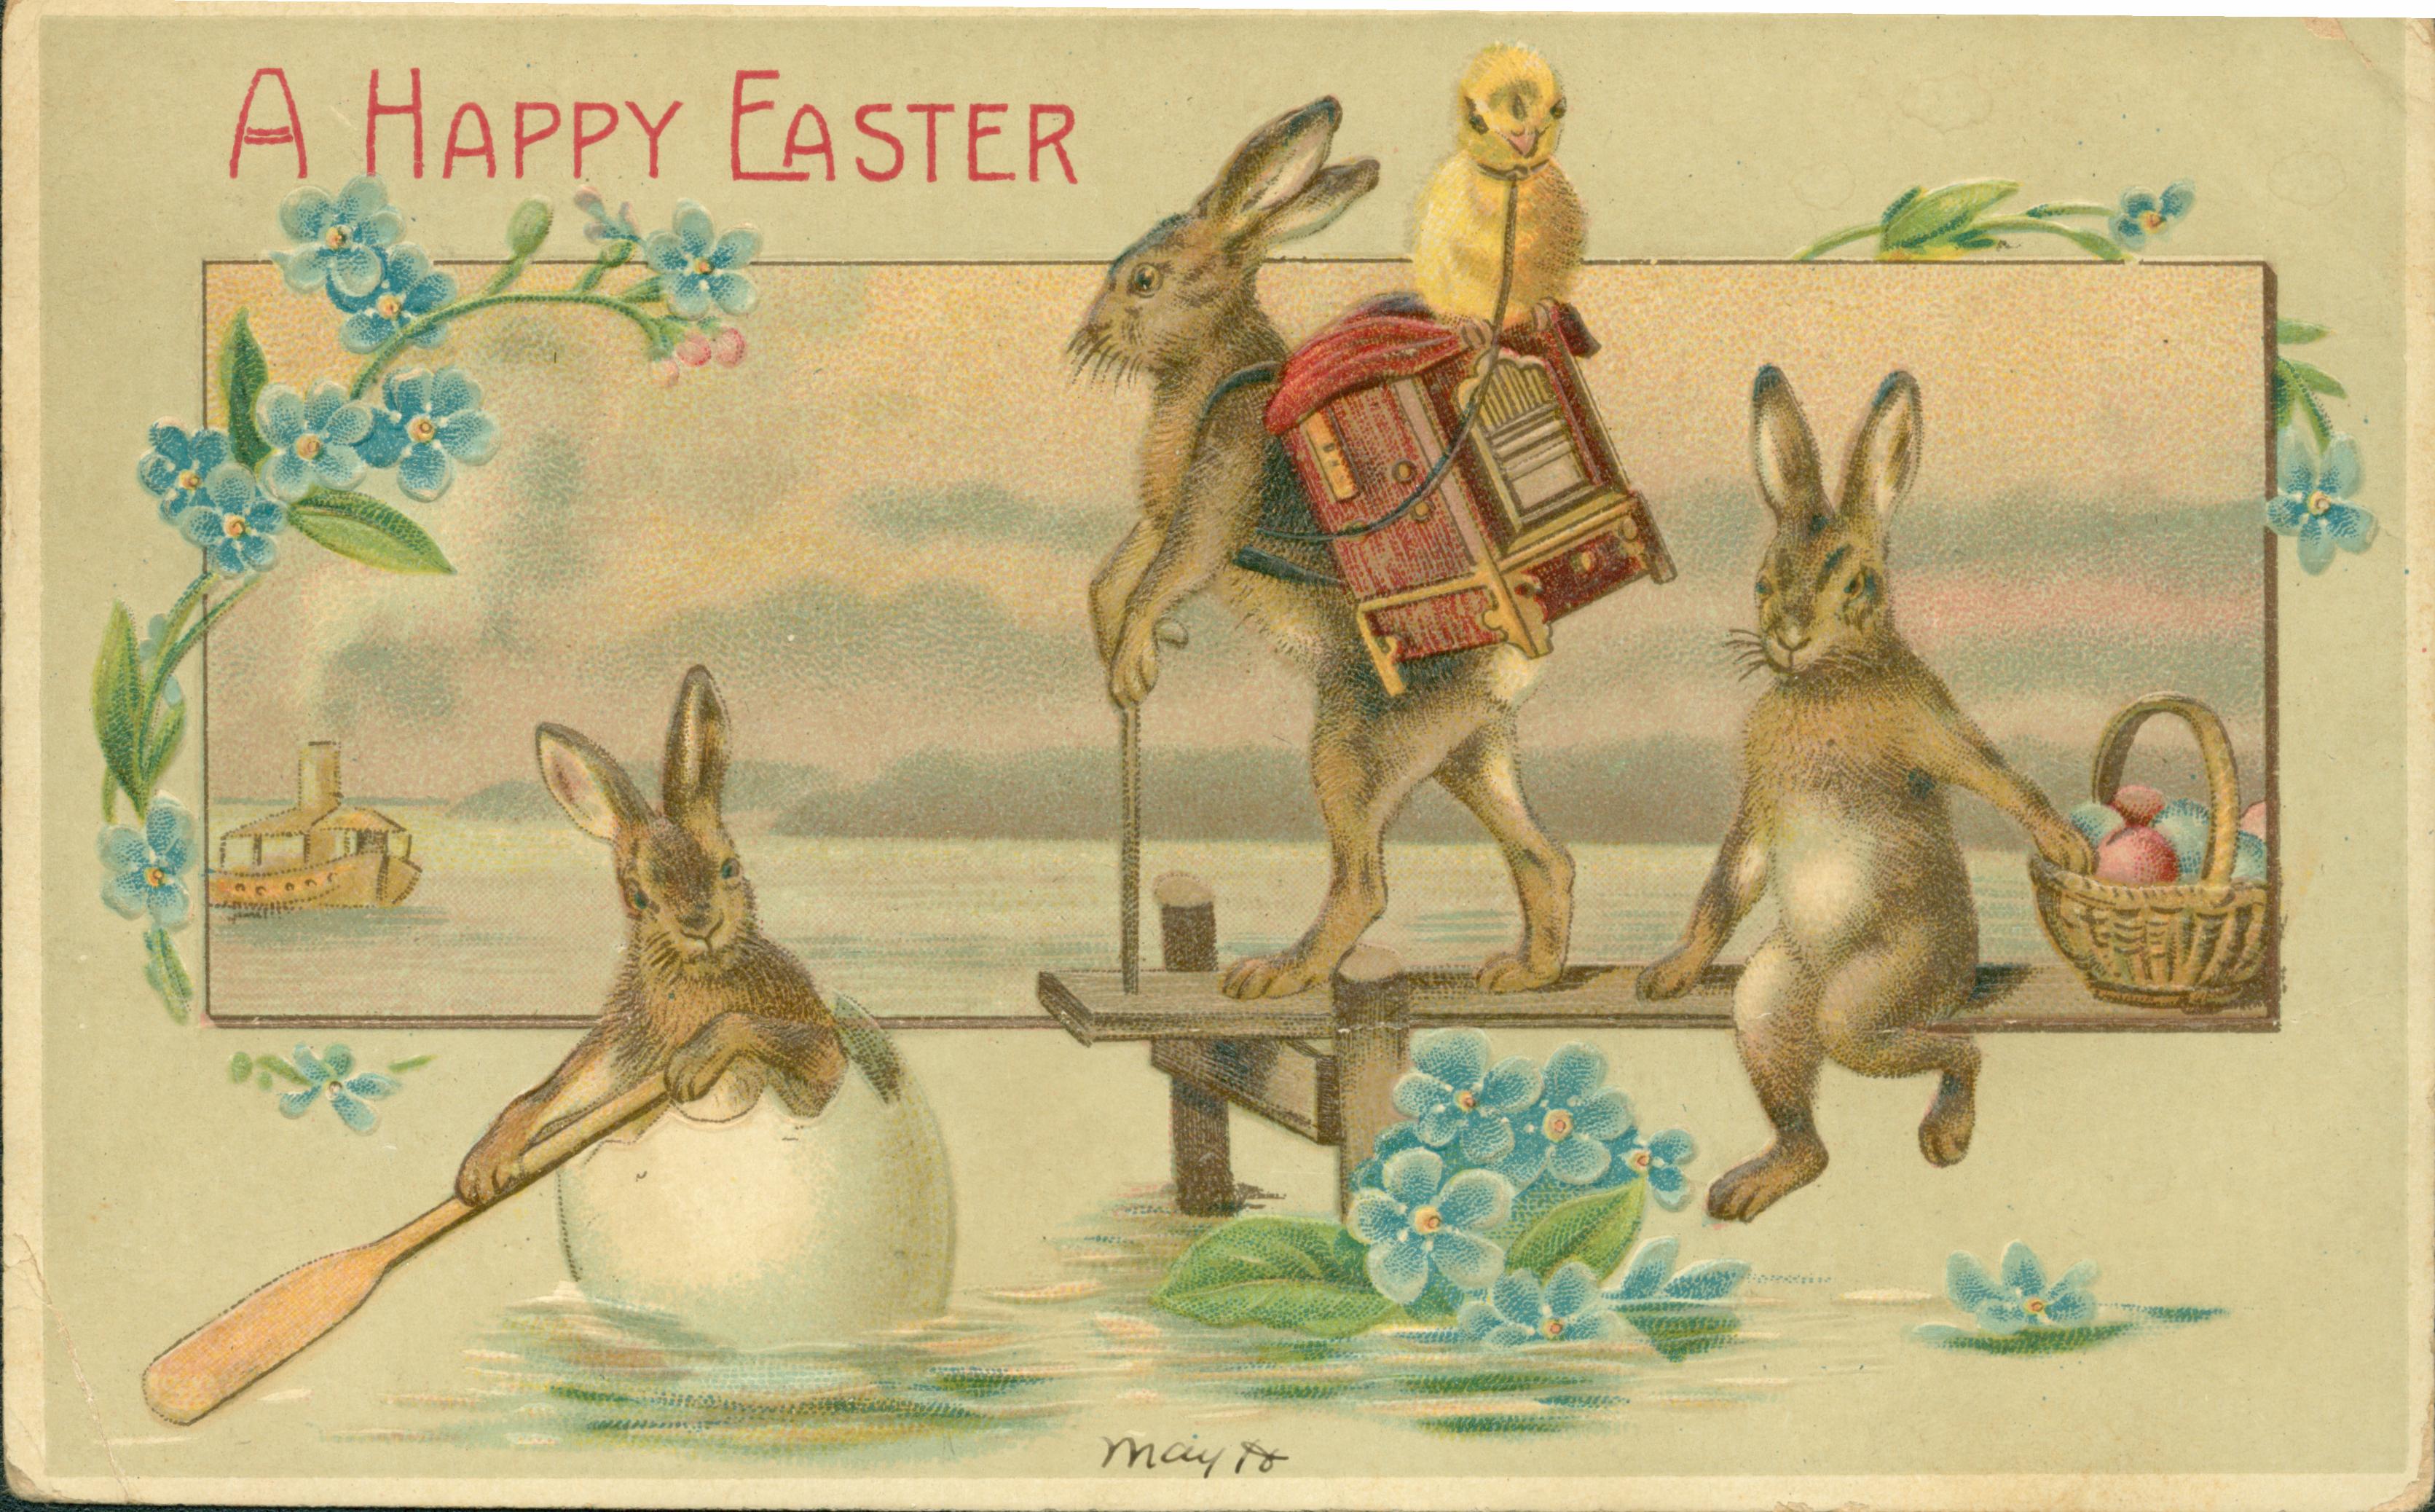 Three rabbits on a dock, one using an egg as a boat and one has a chick on his back.